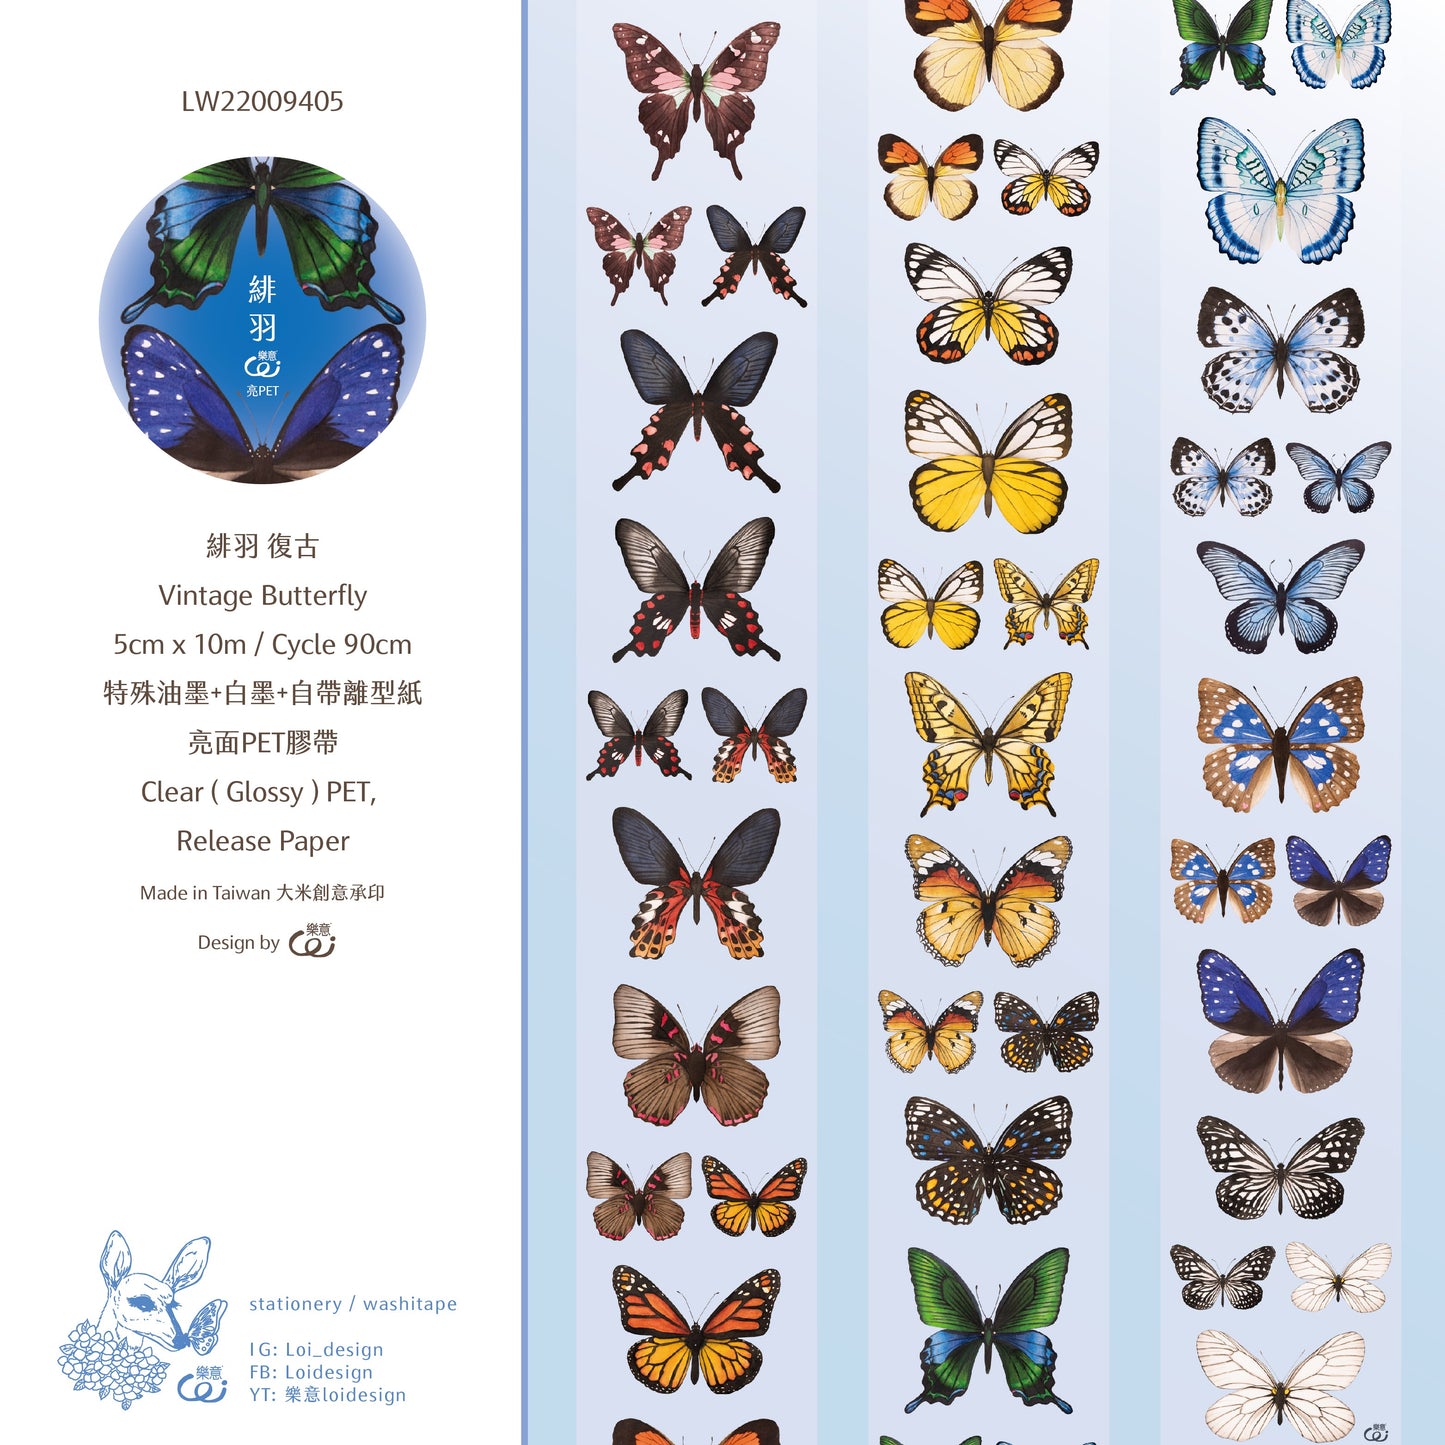 One Loop Sample - Loidesign Vintage Butterfly Glossy PET Tape